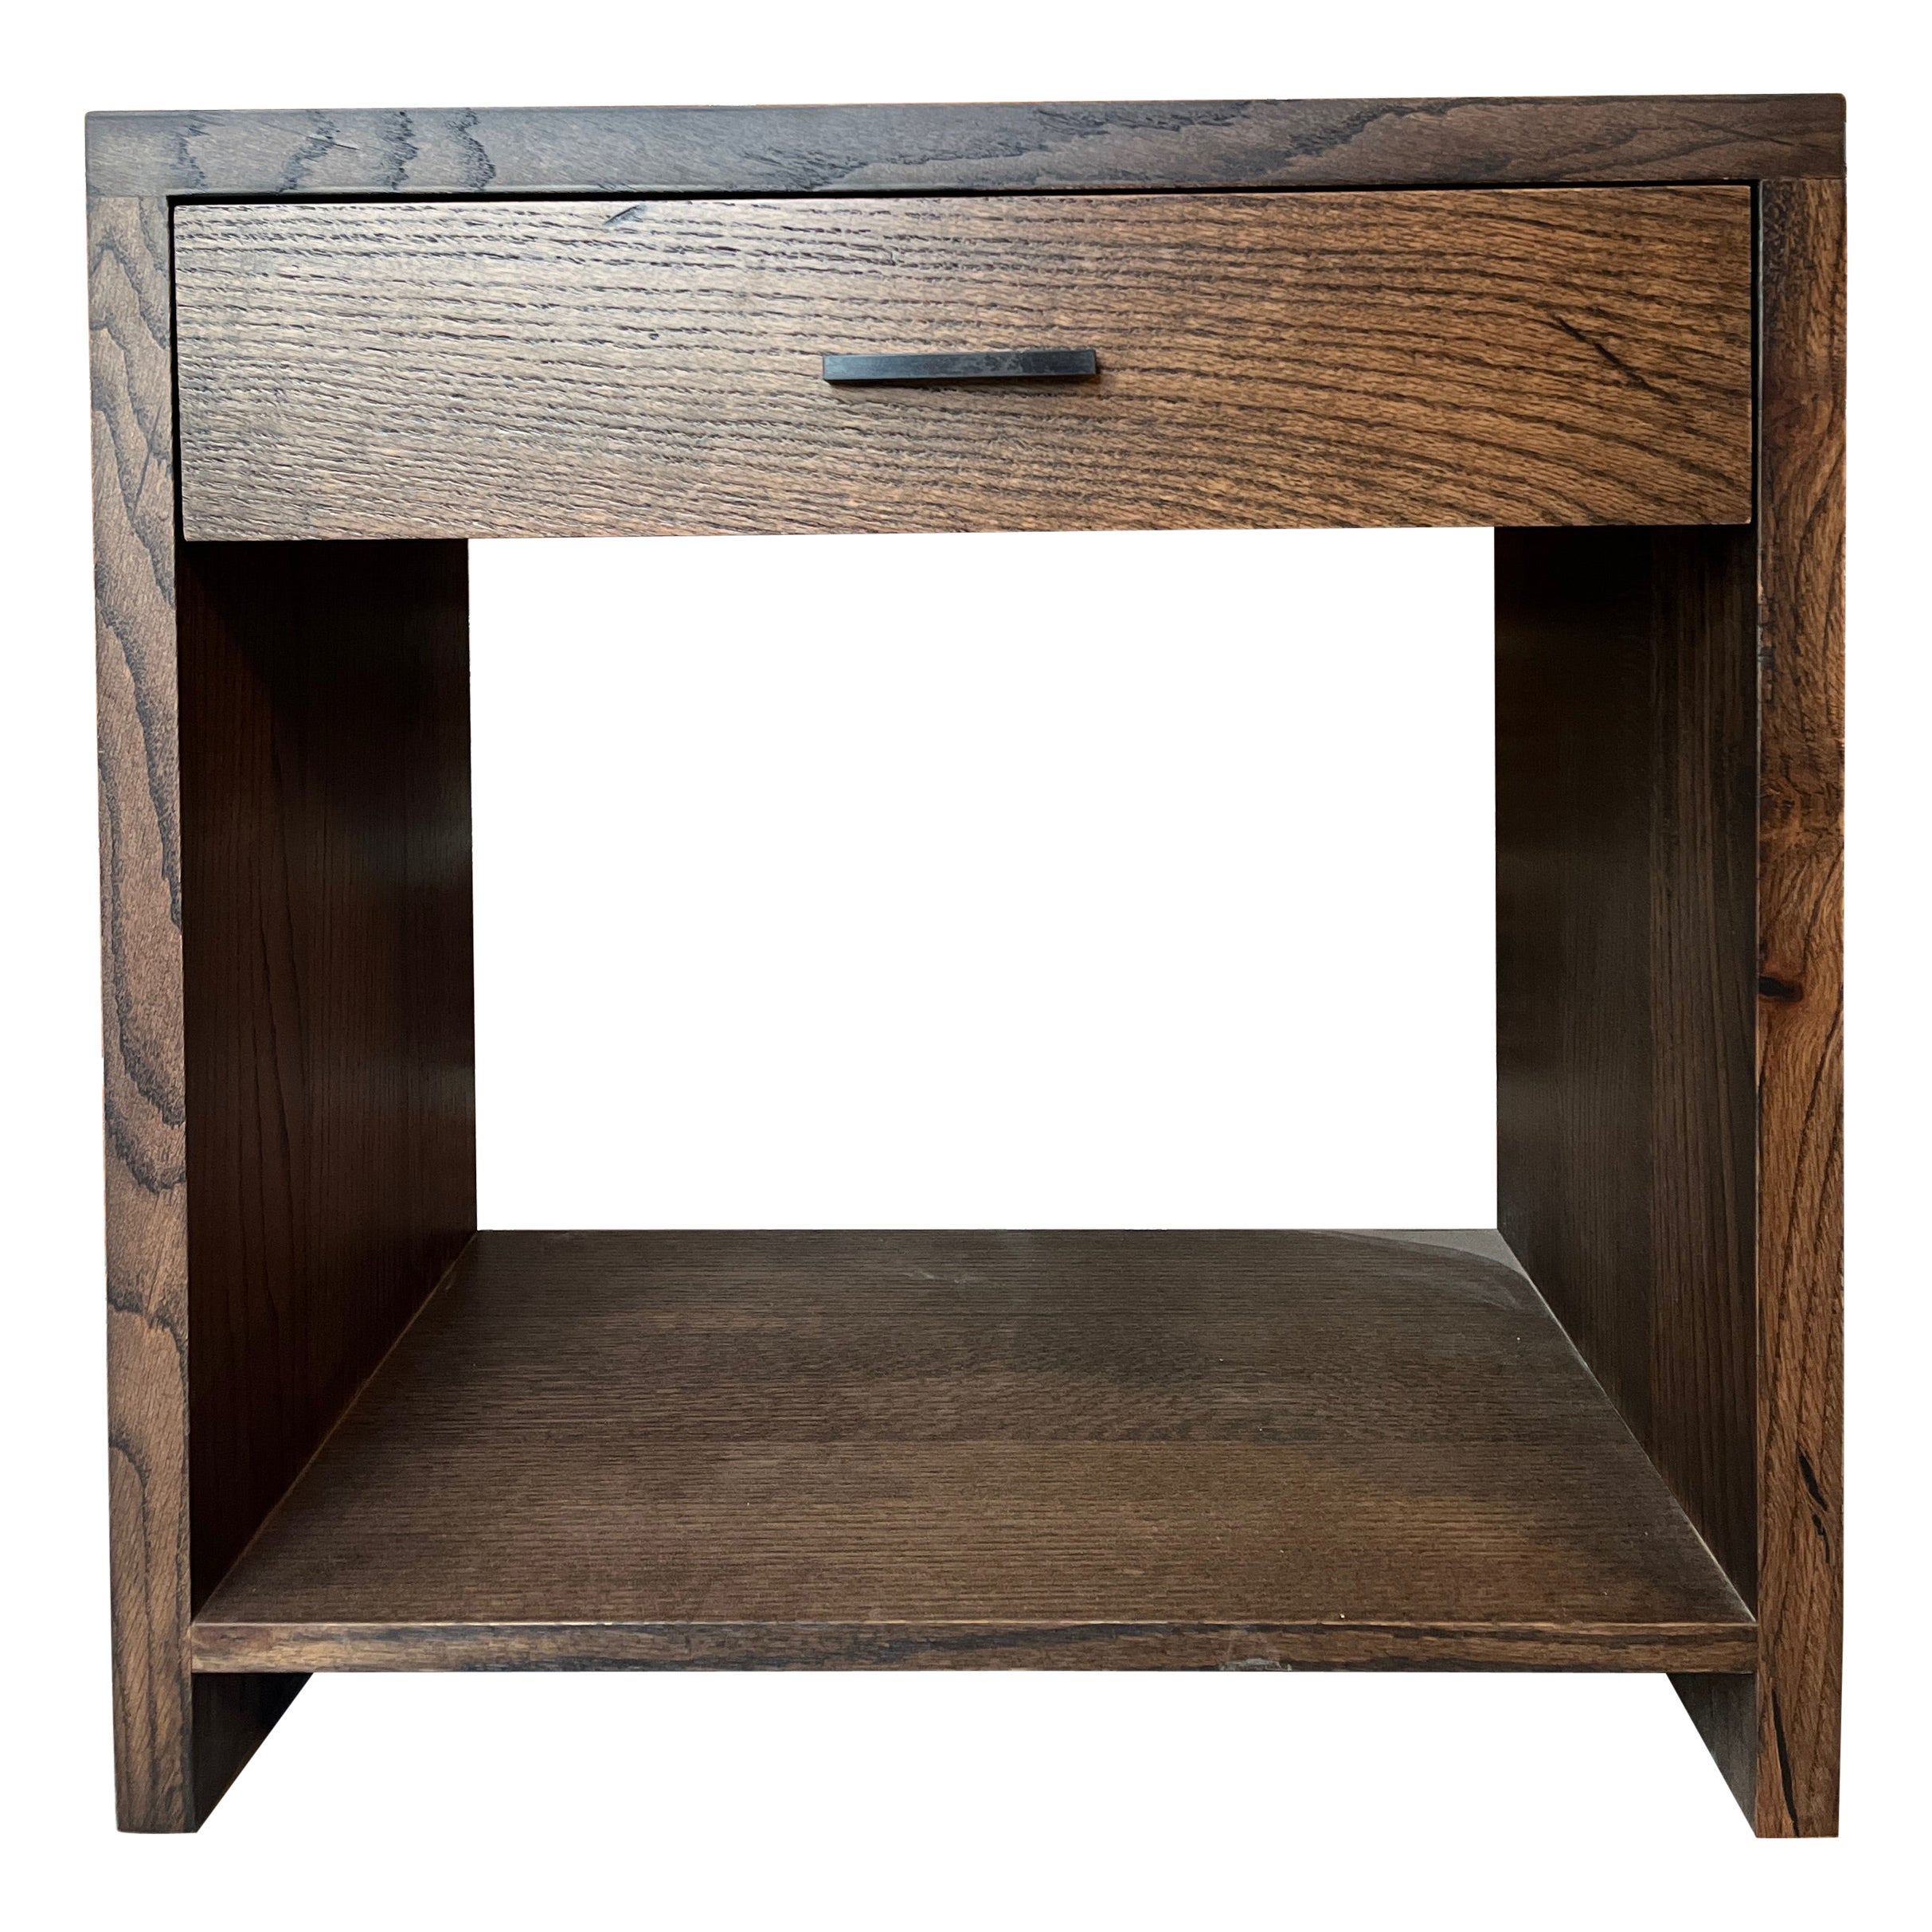 Solid Wood Bedside Table Box Joints Storage Dark Stain Evolve by Alabama Sawyer